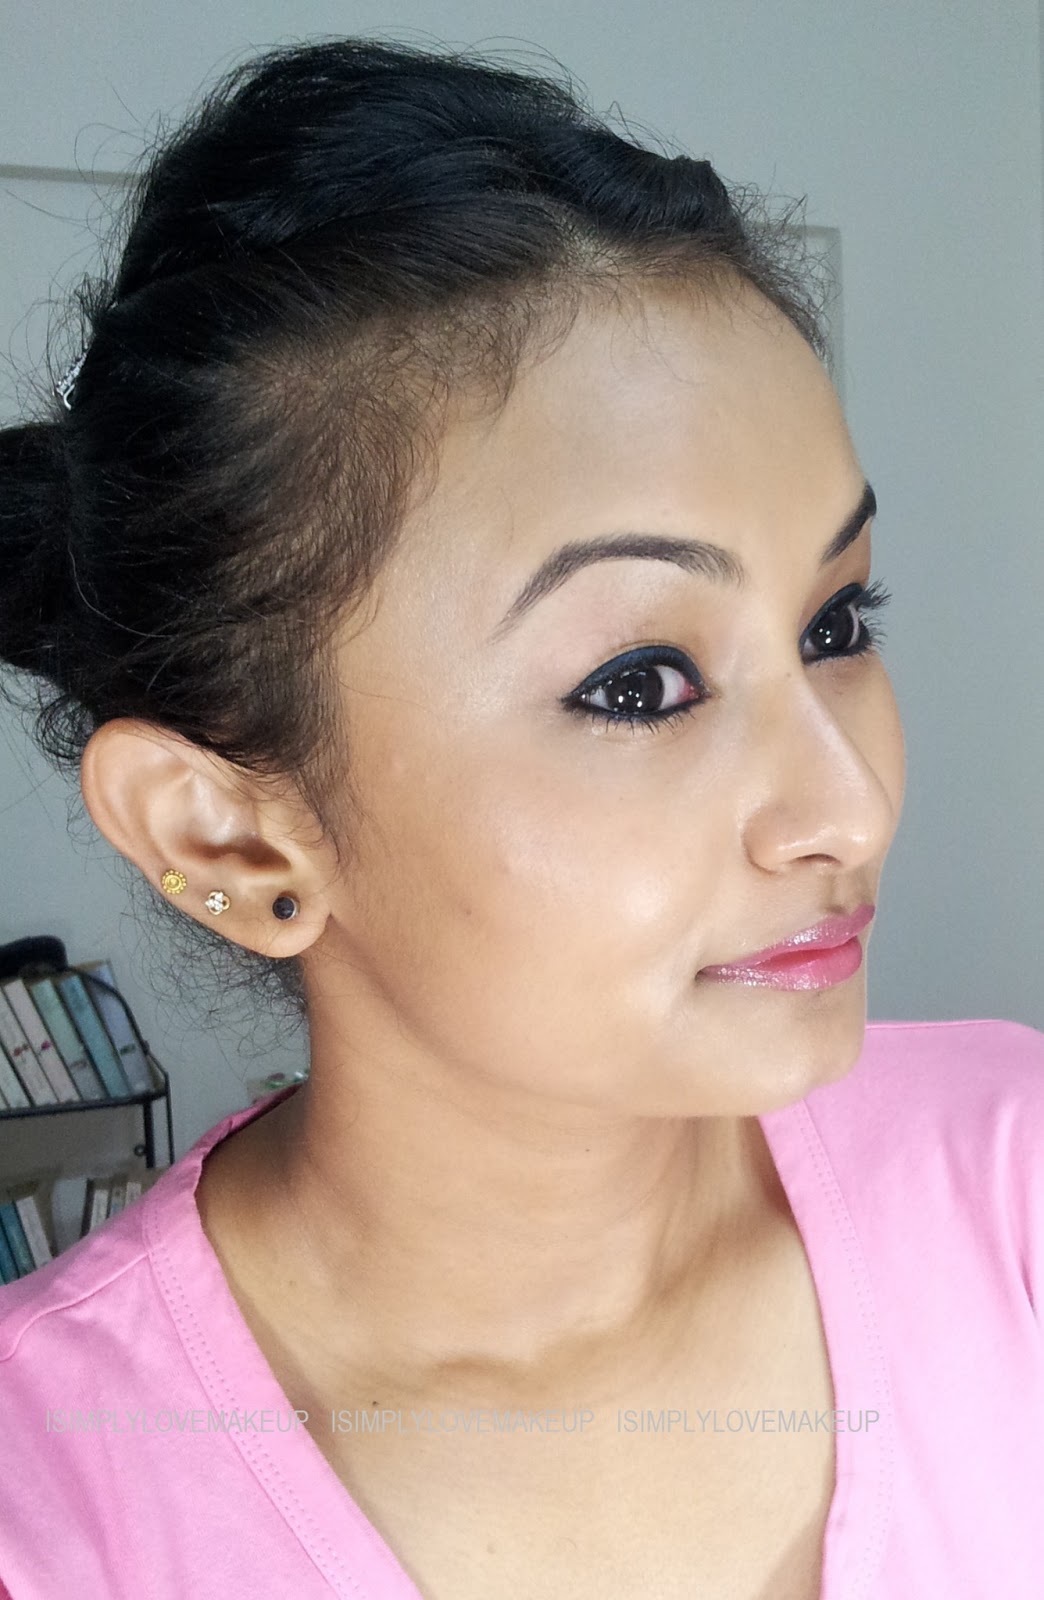 Collaboration Post: College Ready Makeup Within A Pocket Money Budget